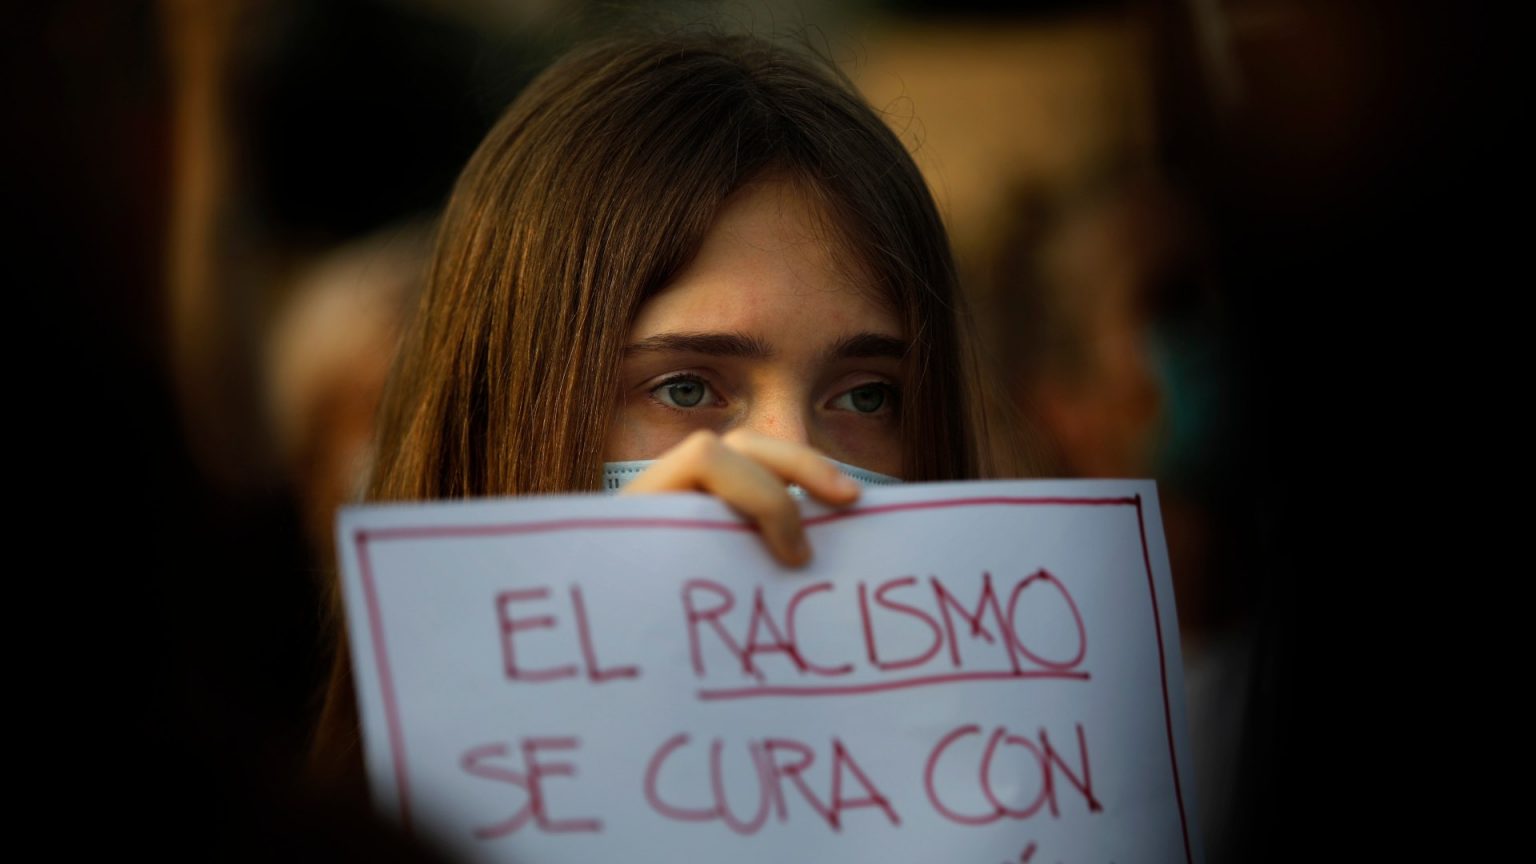 Racismo ‘made in Spain’